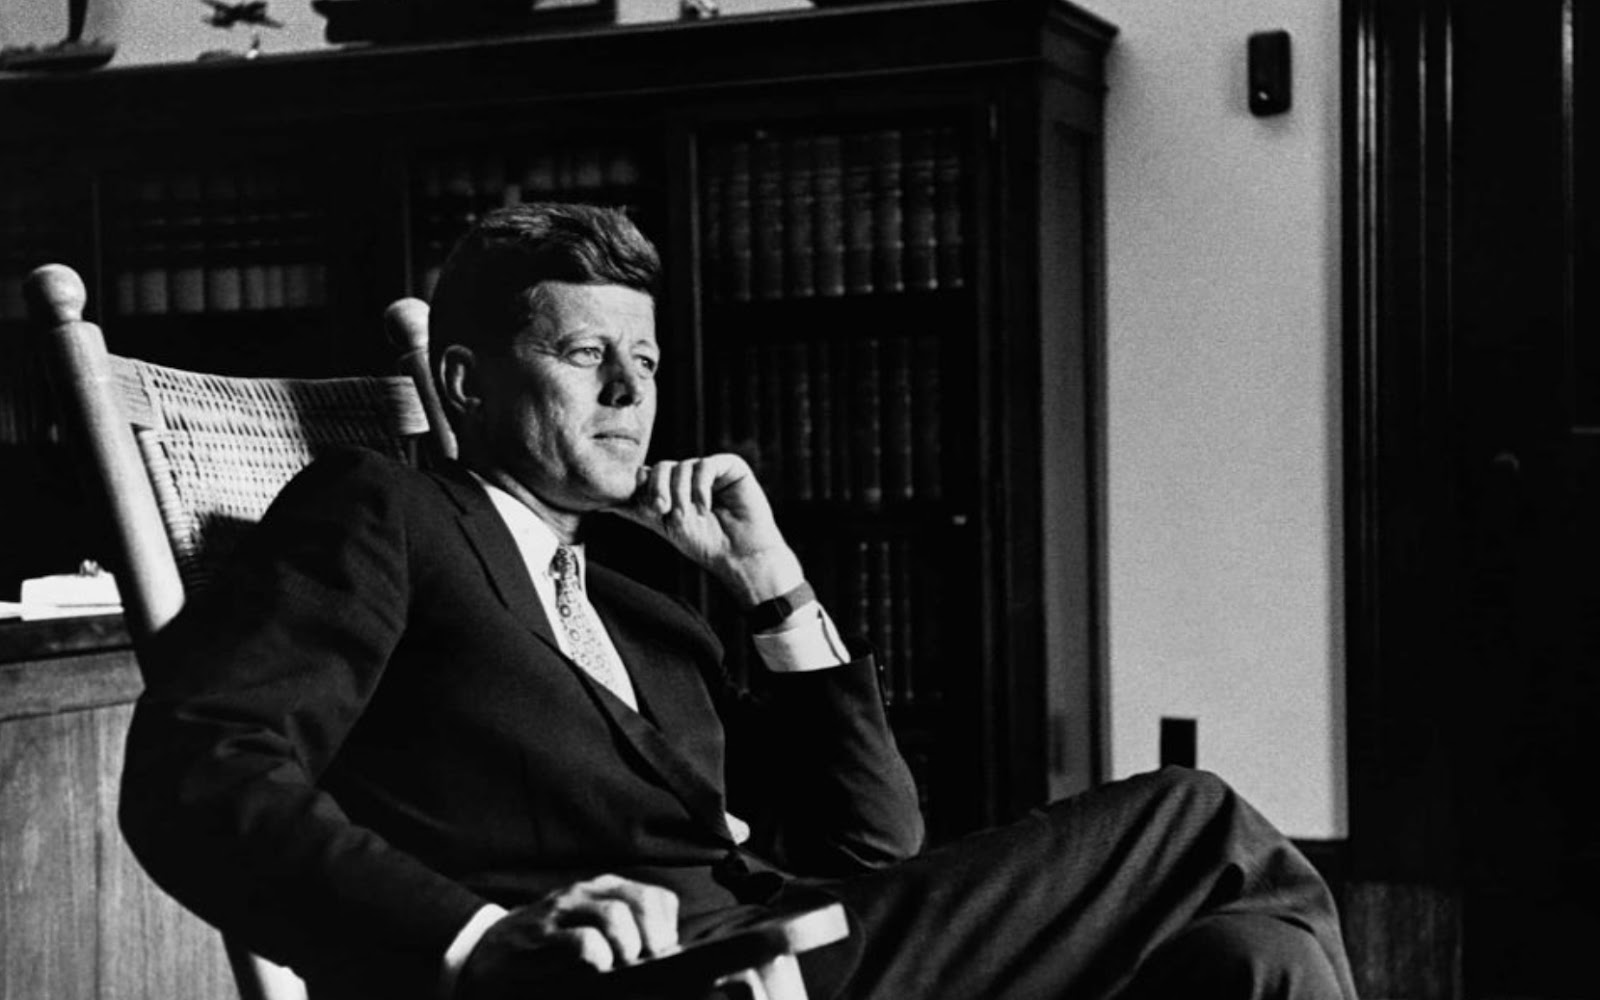 US President John F. Kennedy inherited the Bay of Pigs invasion when he became president